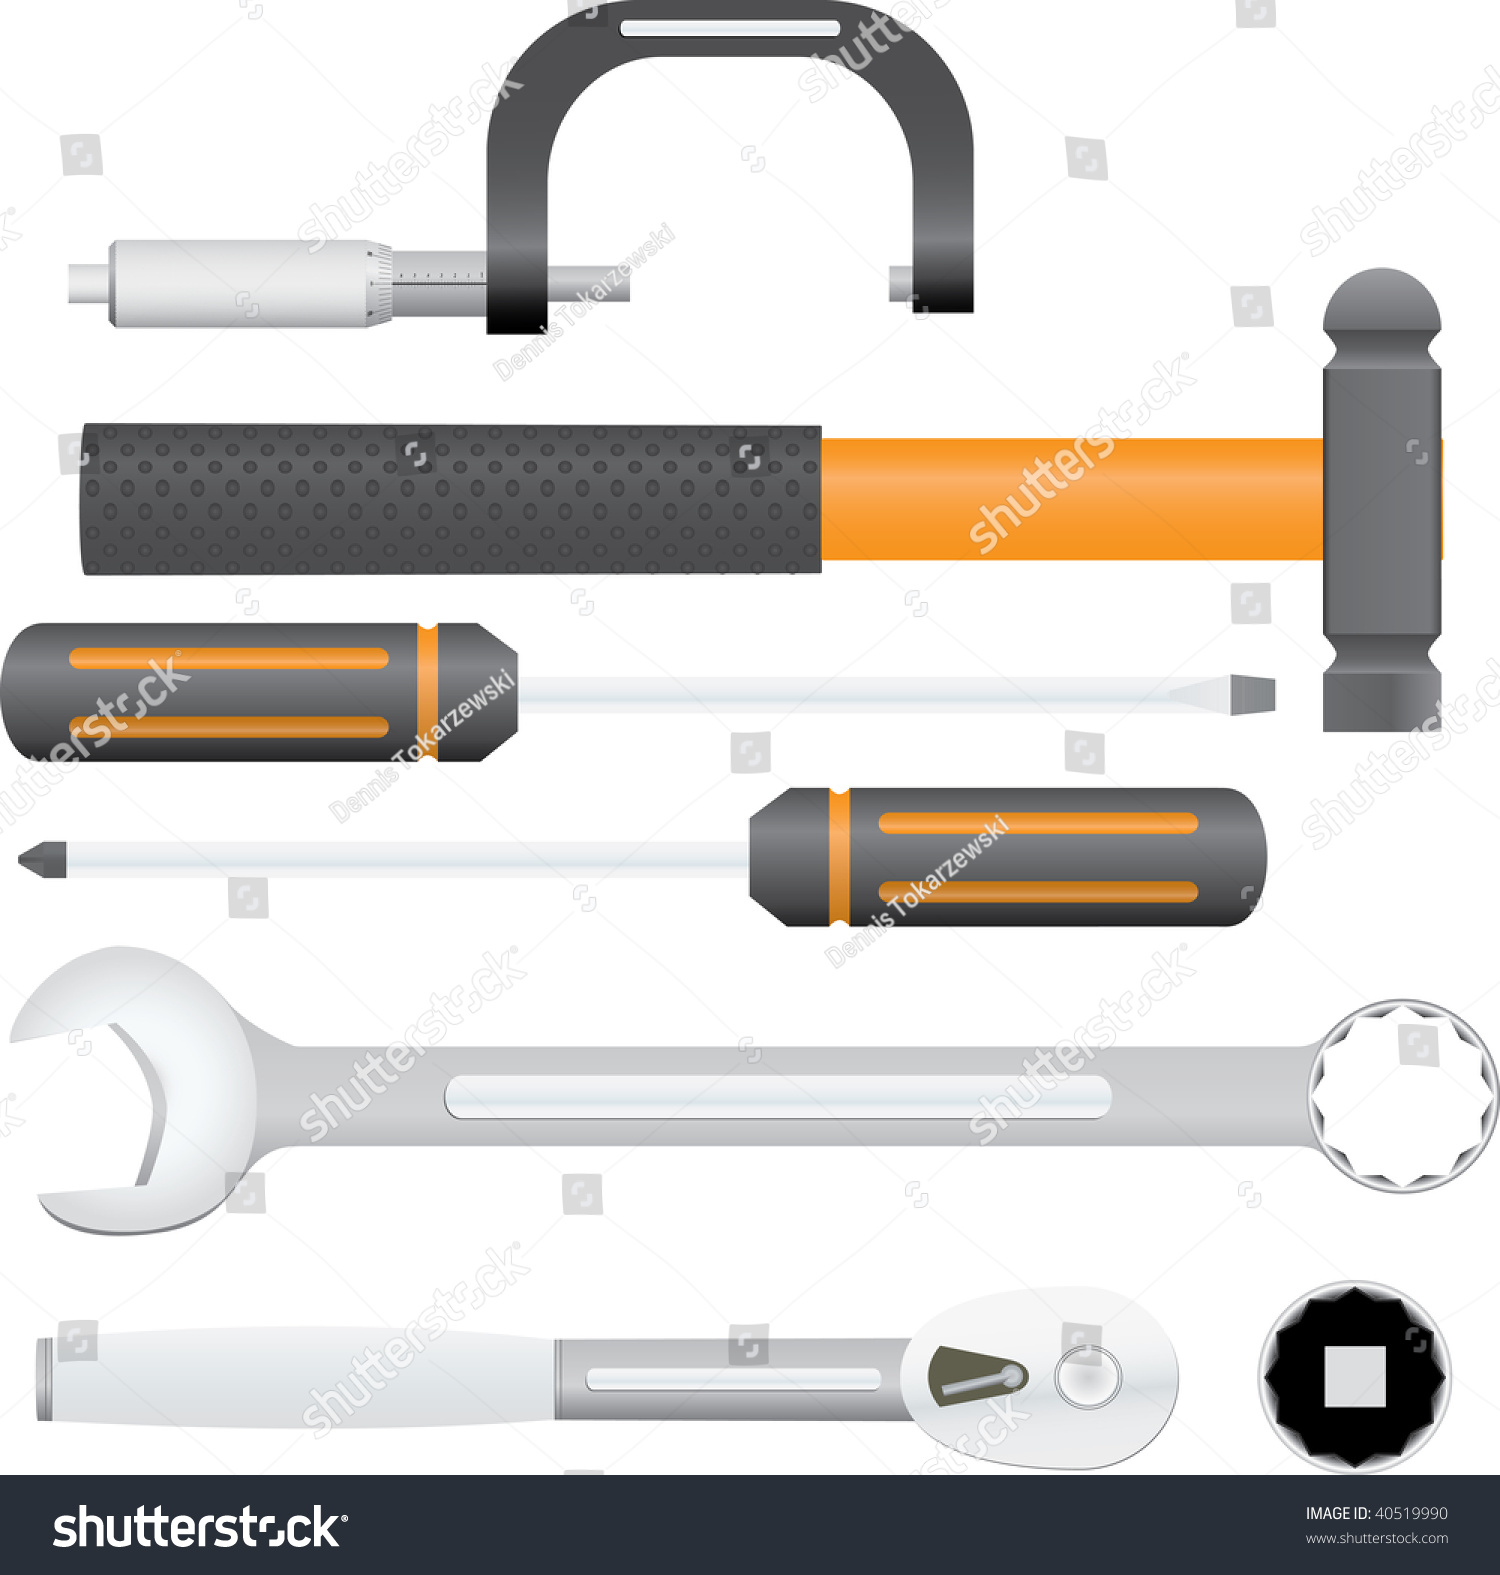 SVG of Collection of automotive service tools. Includes micrometer, combination wrench, ball pein hammer, screwdrivers, ratchet, and socket. svg